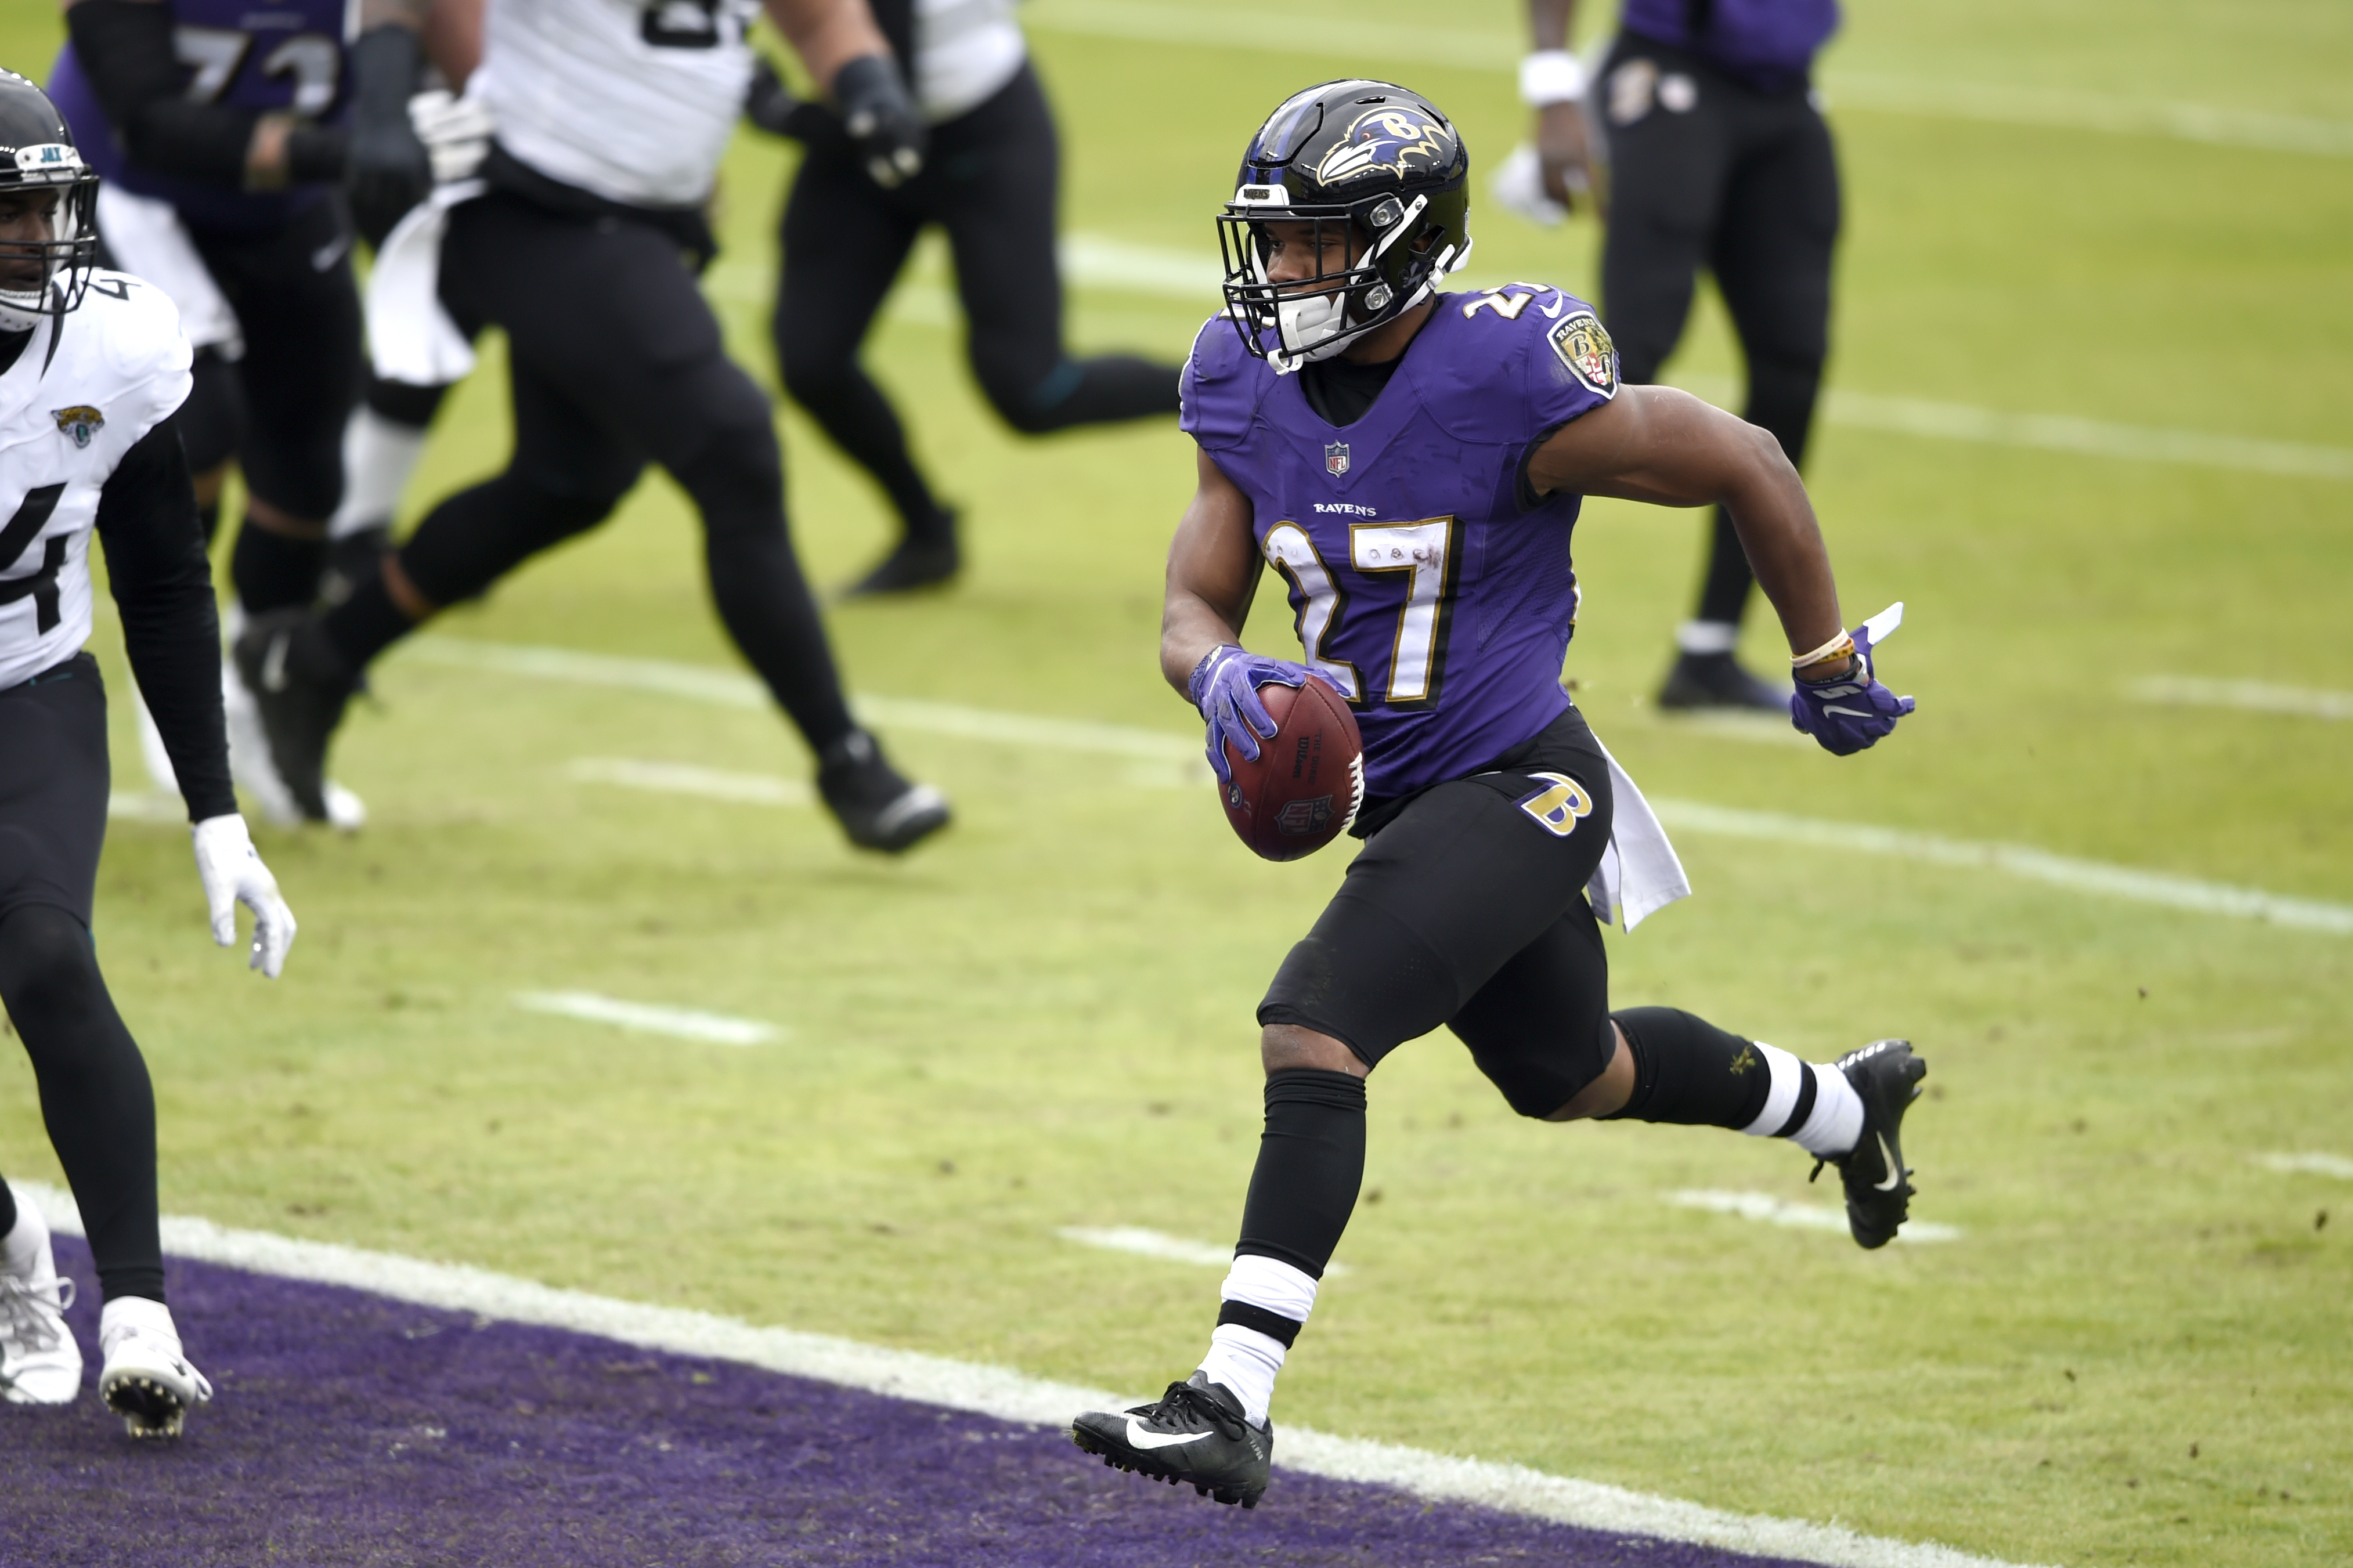 Jackson leads surging Ravens to 40-14 rout of Jaguars